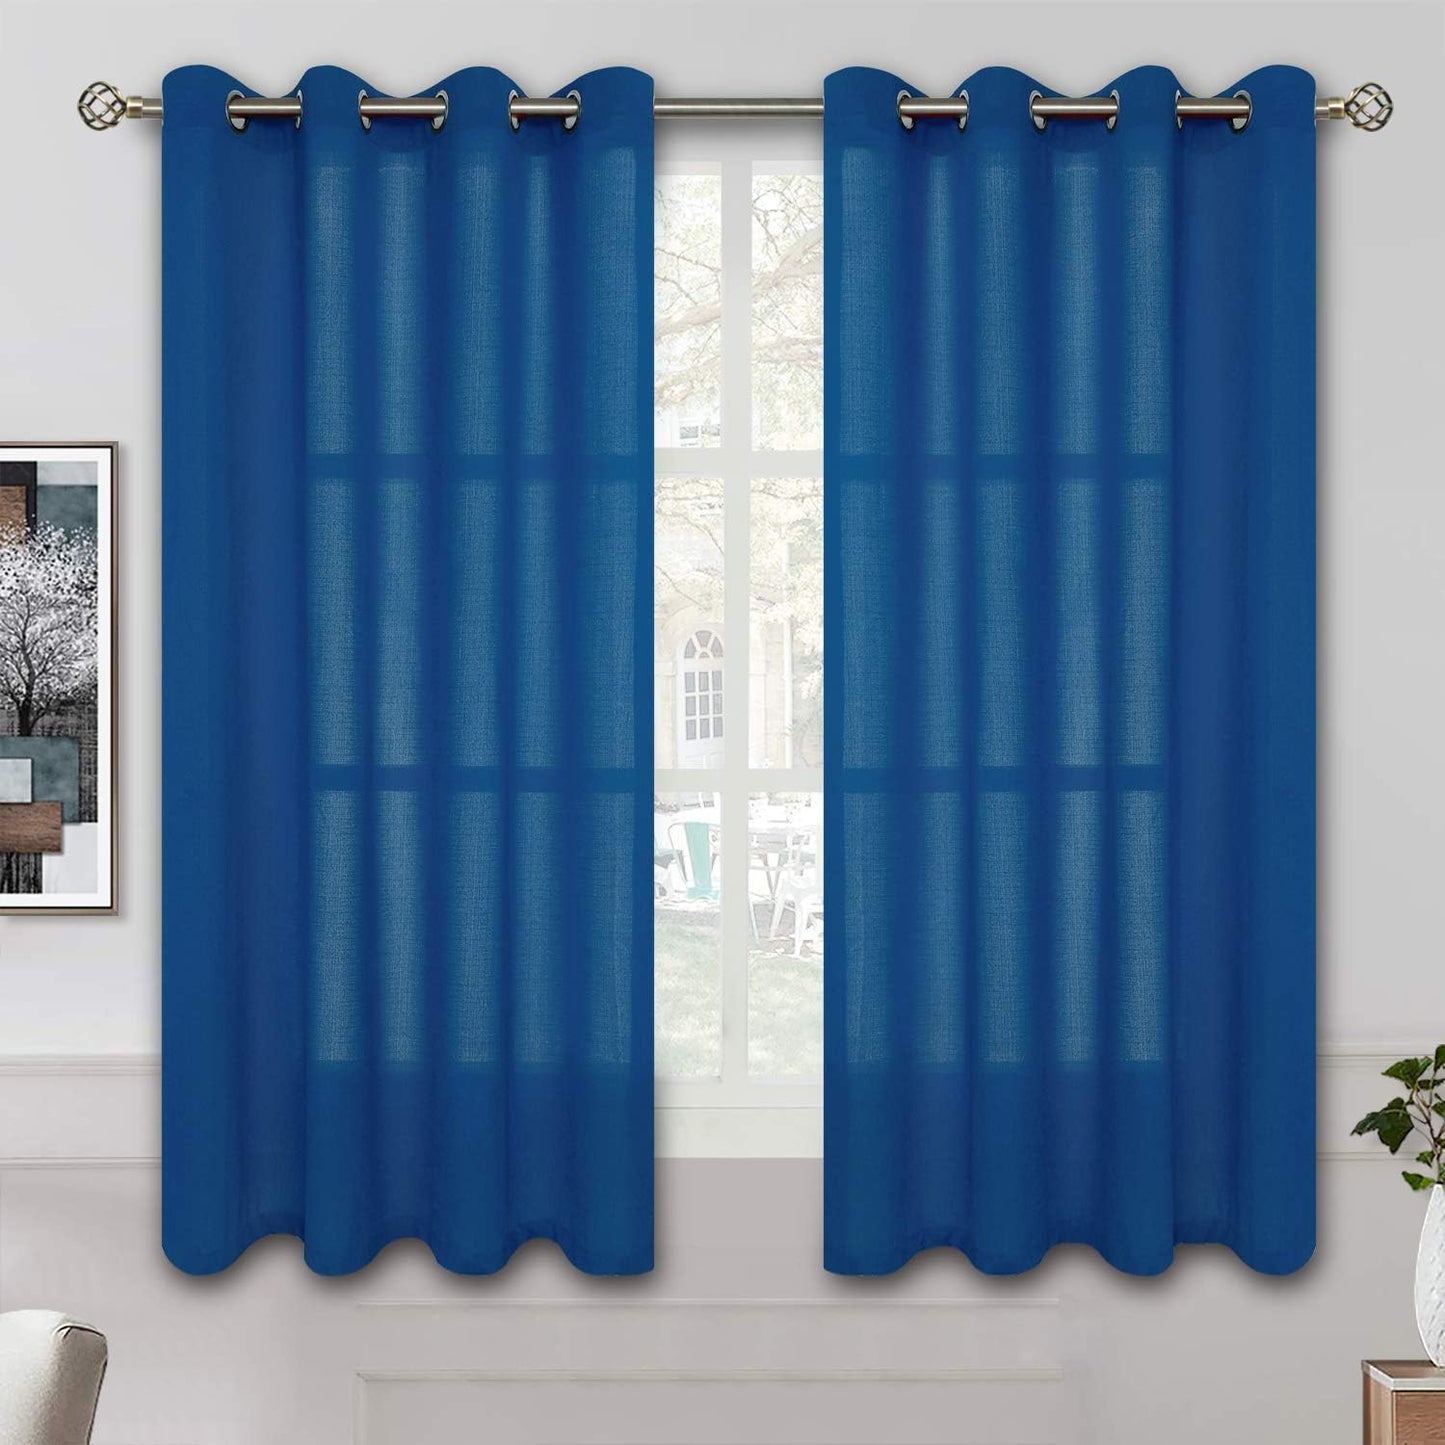 Bgment Natural Linen Look Semi Sheer Curtains for Bedroom, 52 X 54 Inch White Grommet Light Filtering Casual Textured Privacy Curtains for Bay Window, 2 Panels  BGment Classic Blue 52W X 45L 